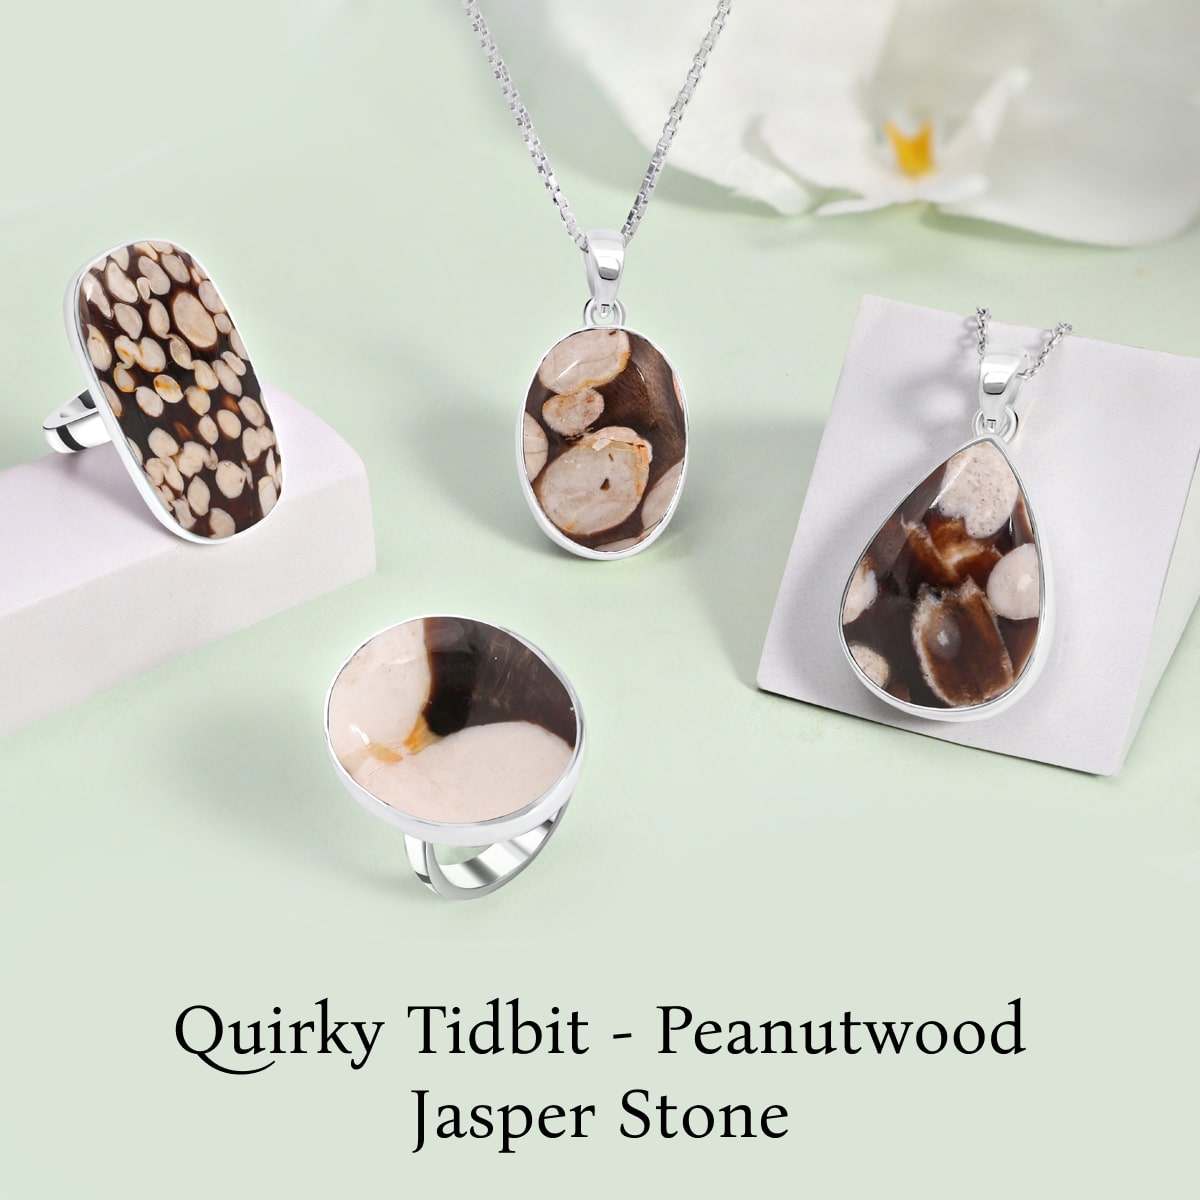 The Use of Fossils in Peanutwood Jasper